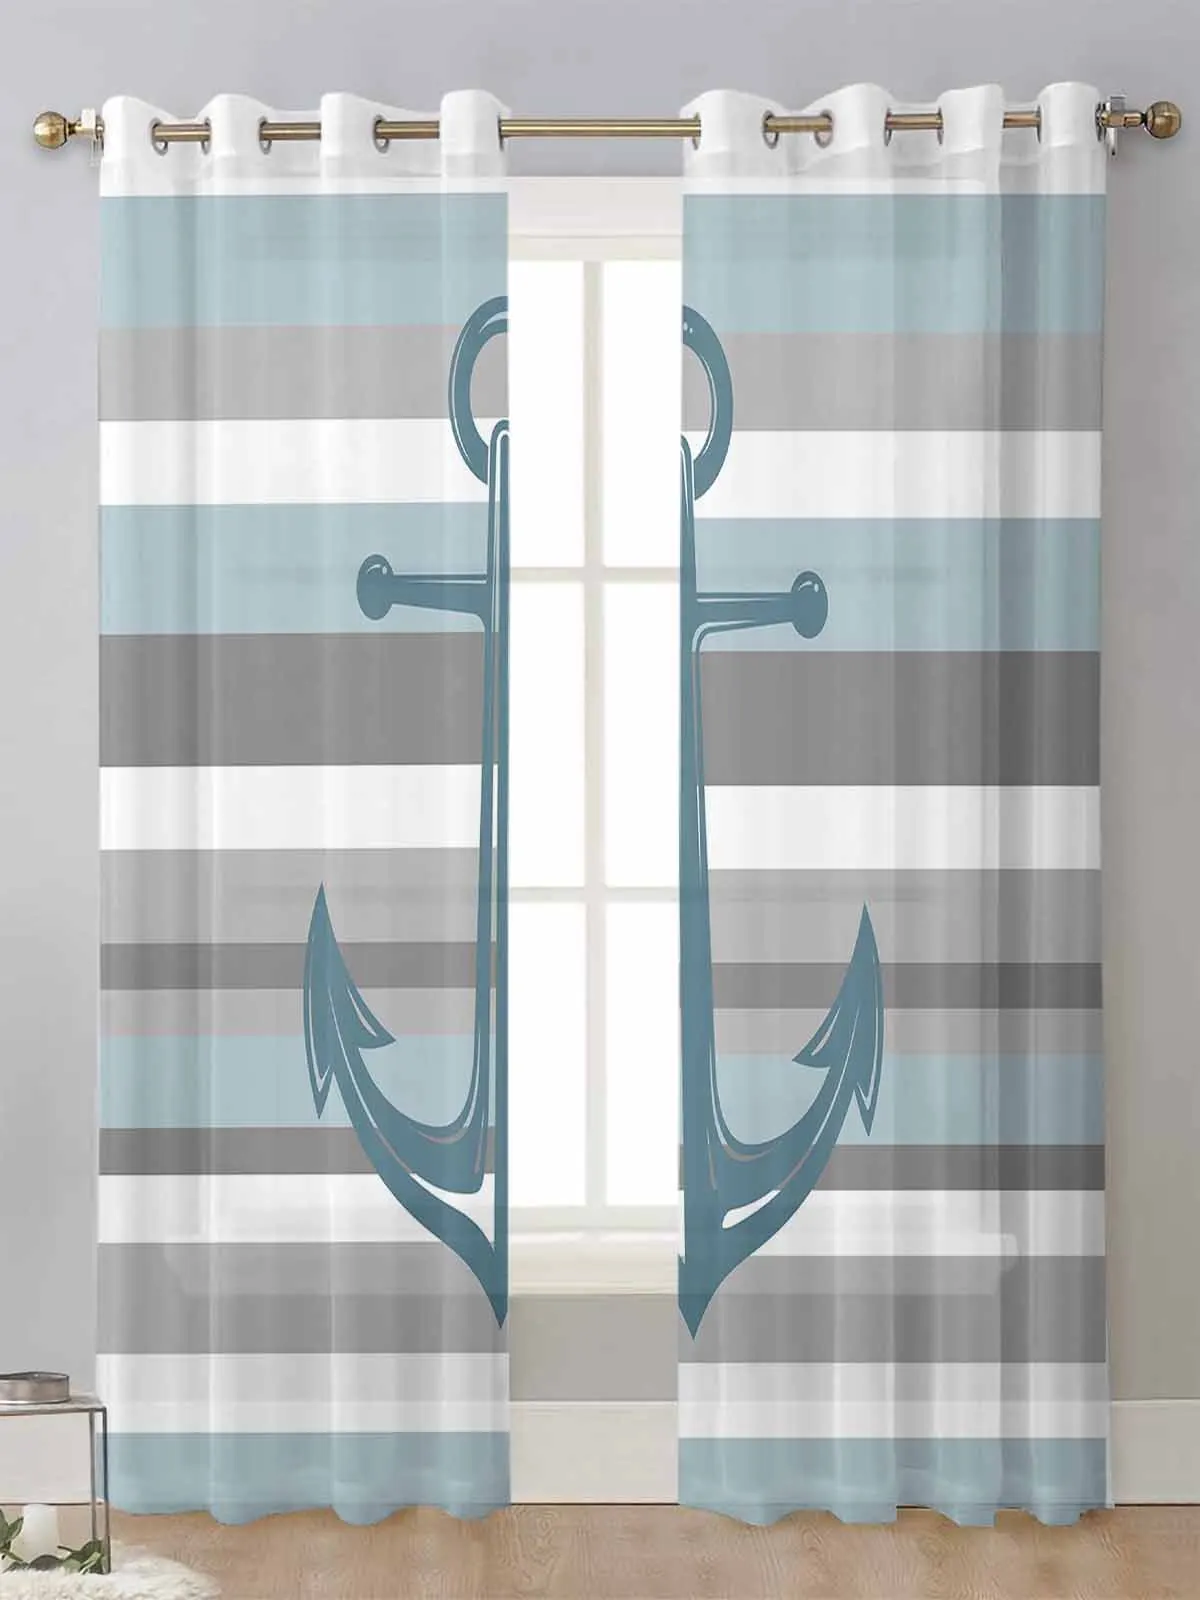 

White Grey Stripes Anchor Sheer Curtains For Living Room Window Transparent Voile Tulle Curtain Cortinas Drapes Home Decor